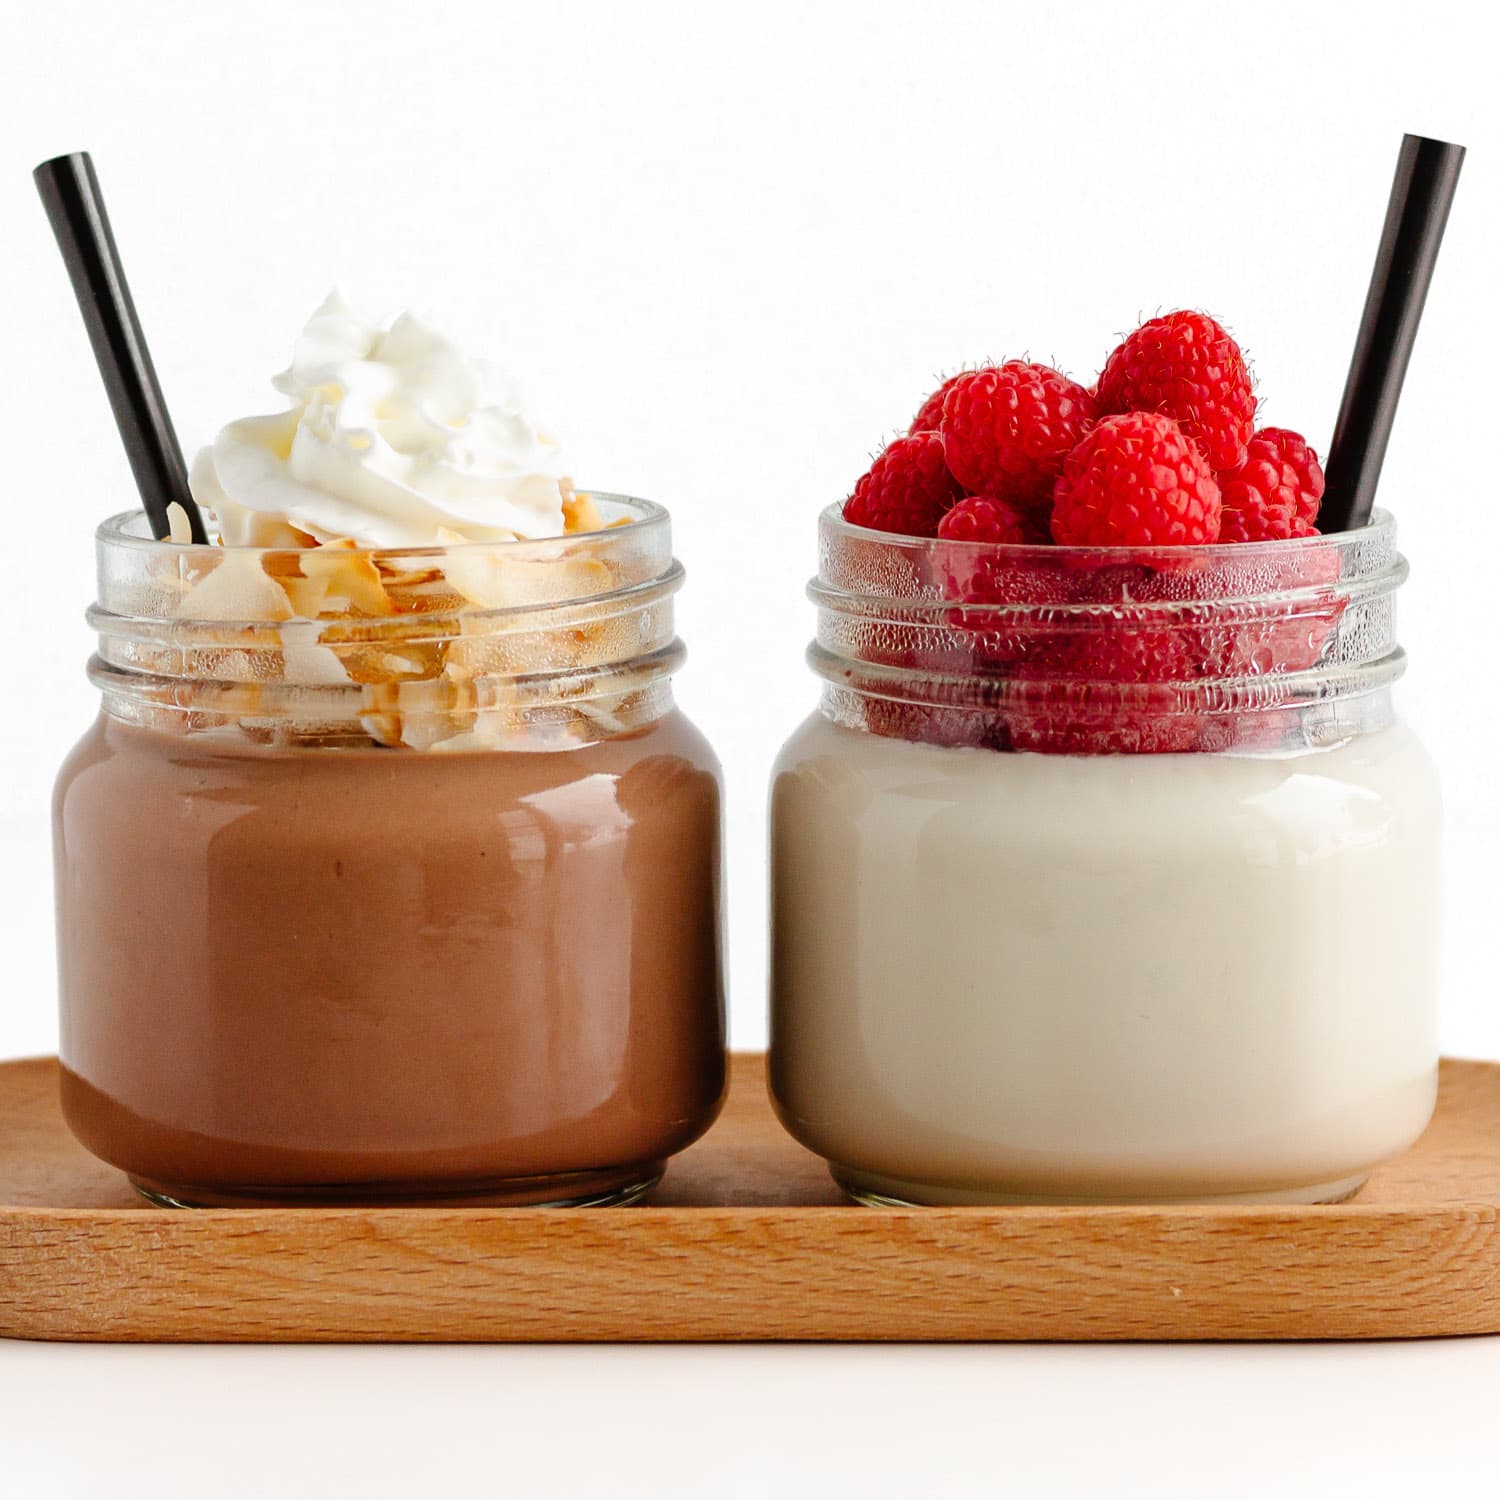 Two glass jars of coconut jello - one chocolate flavor topped with coconut flakes and whipped cream and one vanilla flavor topped with raspberries.